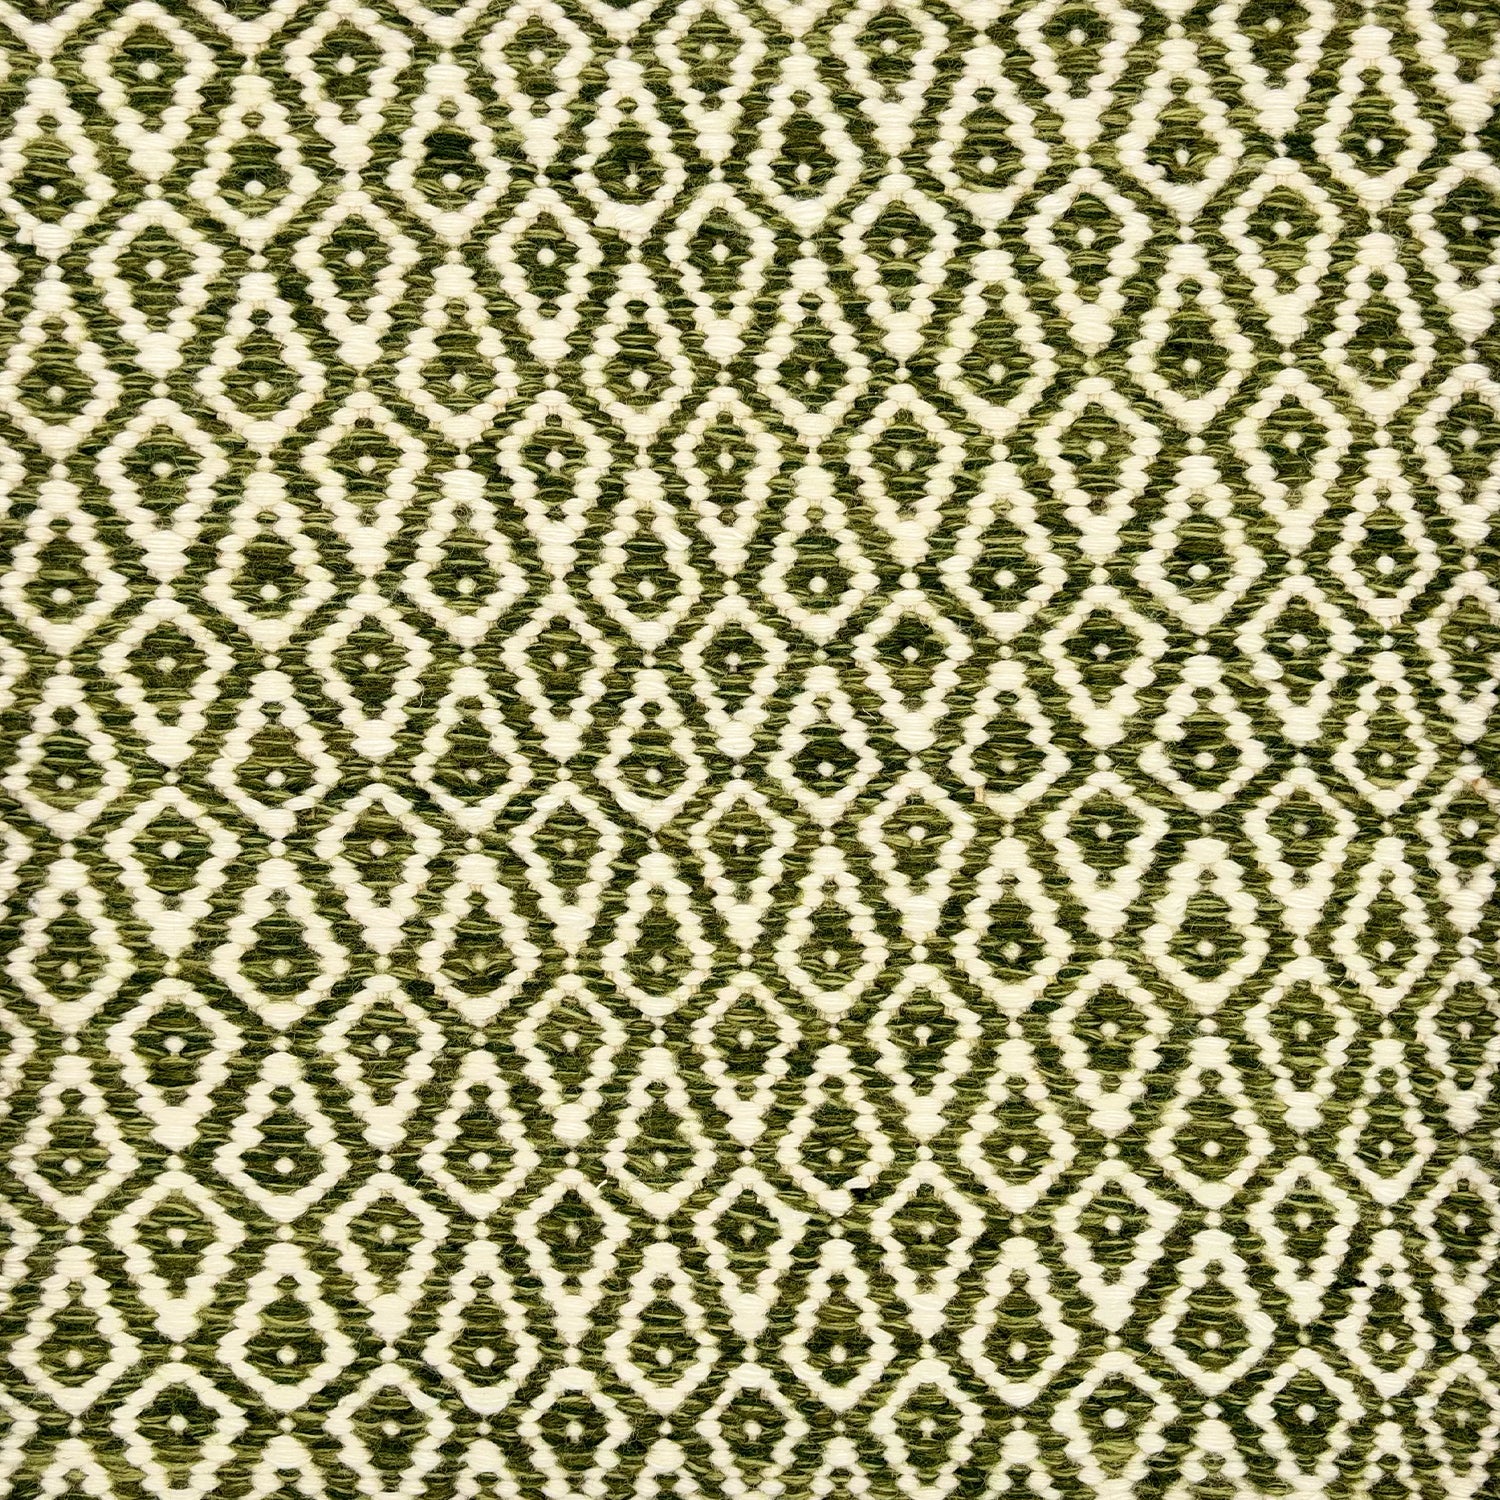 Detail of a handowven rug in an diamond like pattern in white and shades of green.